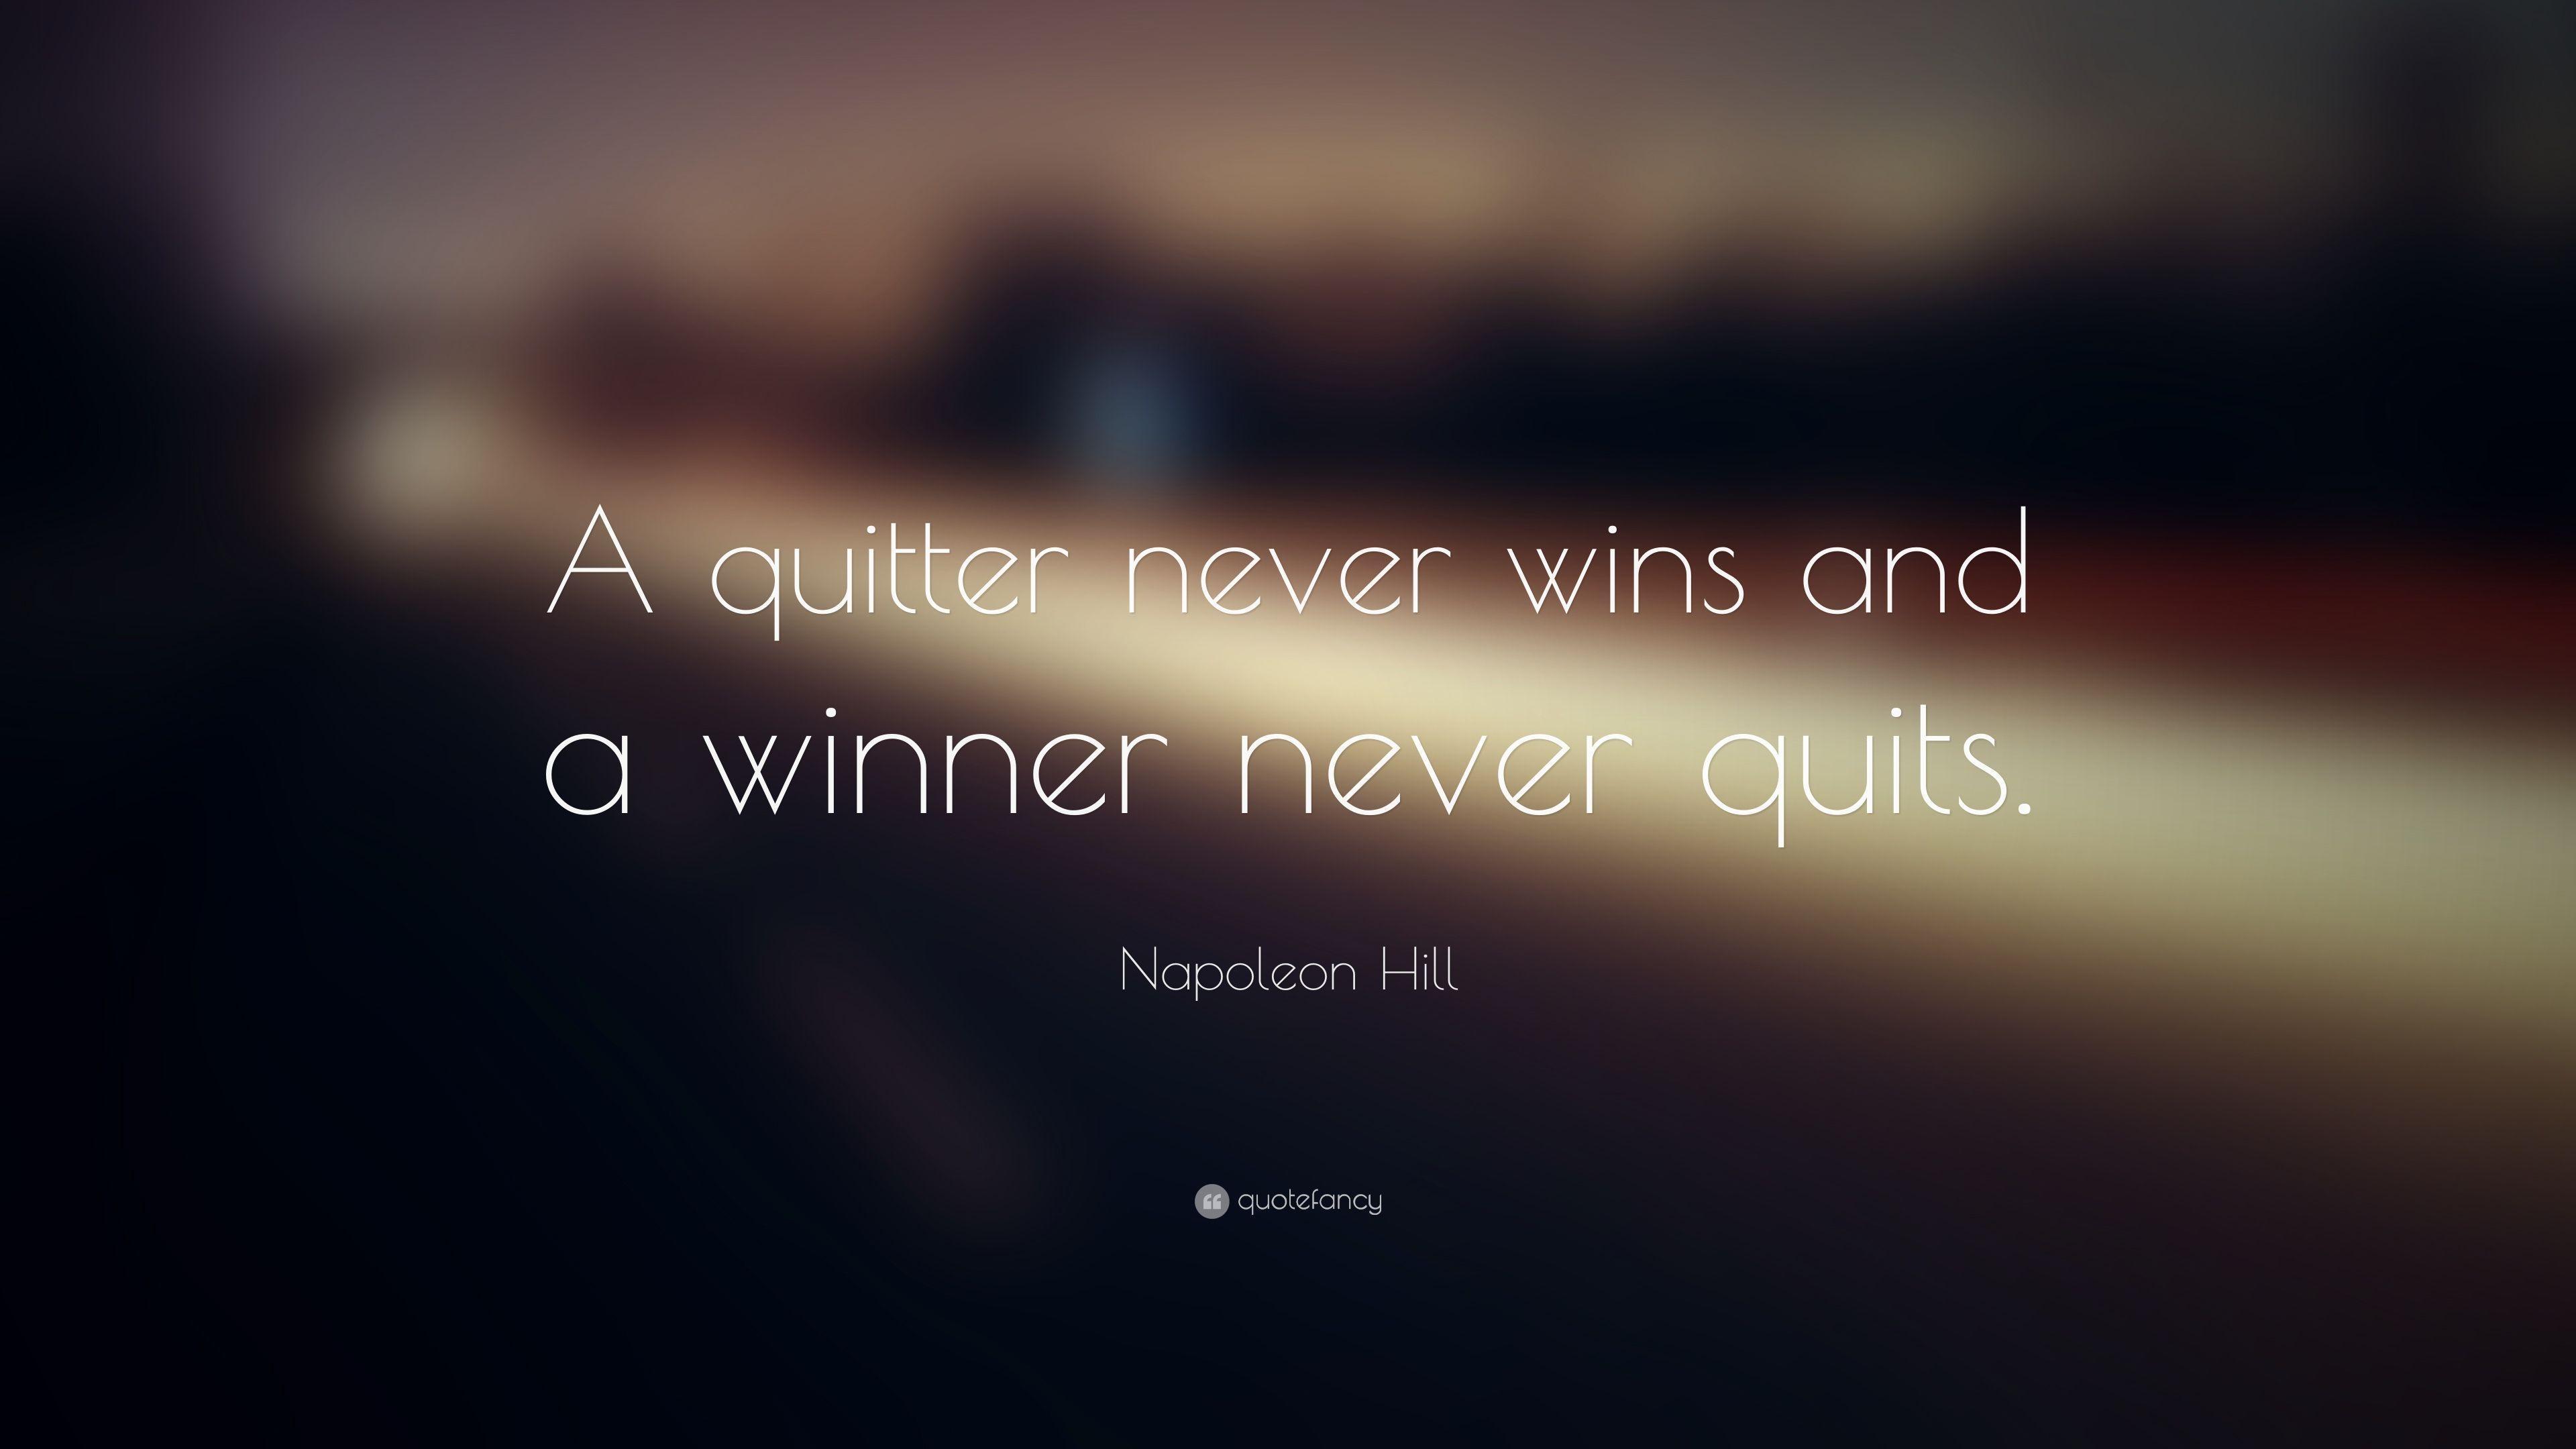 Napoleon Hill Quote: “A quitter never wins and a winner never